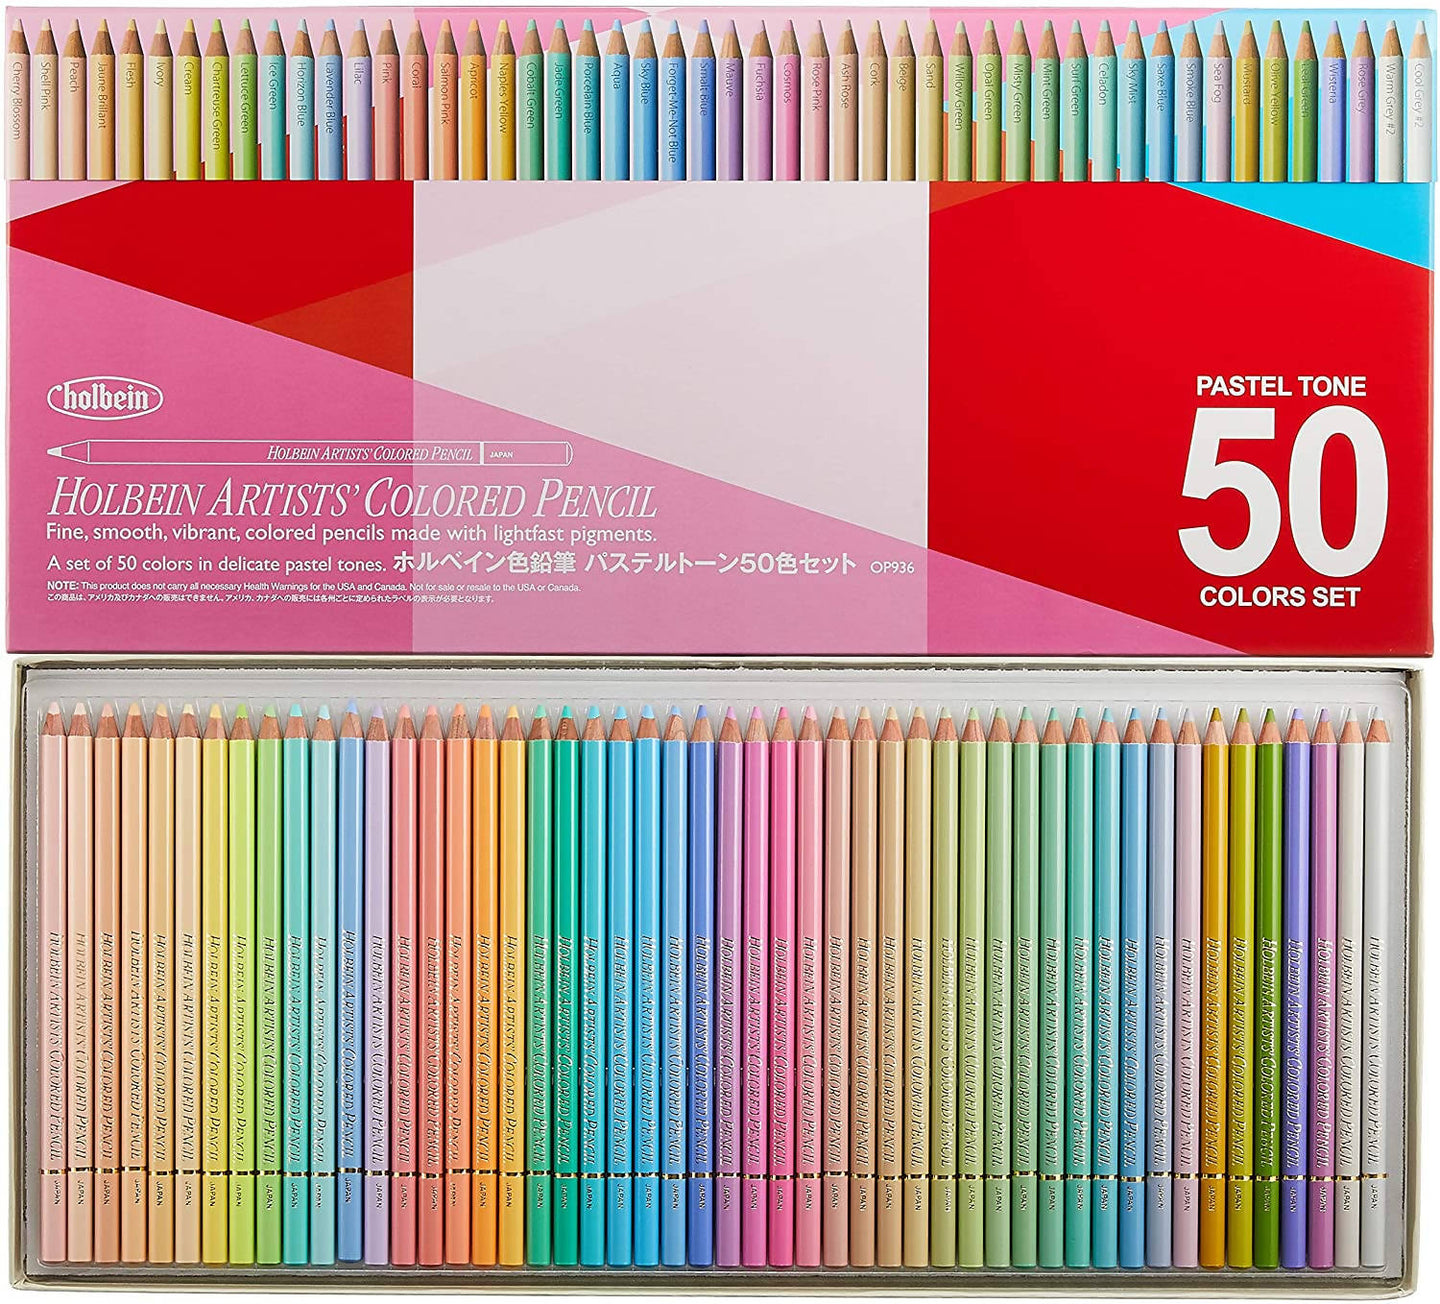 Holbein Artists Colored Pencils  100 Color Set Paper Box OP940